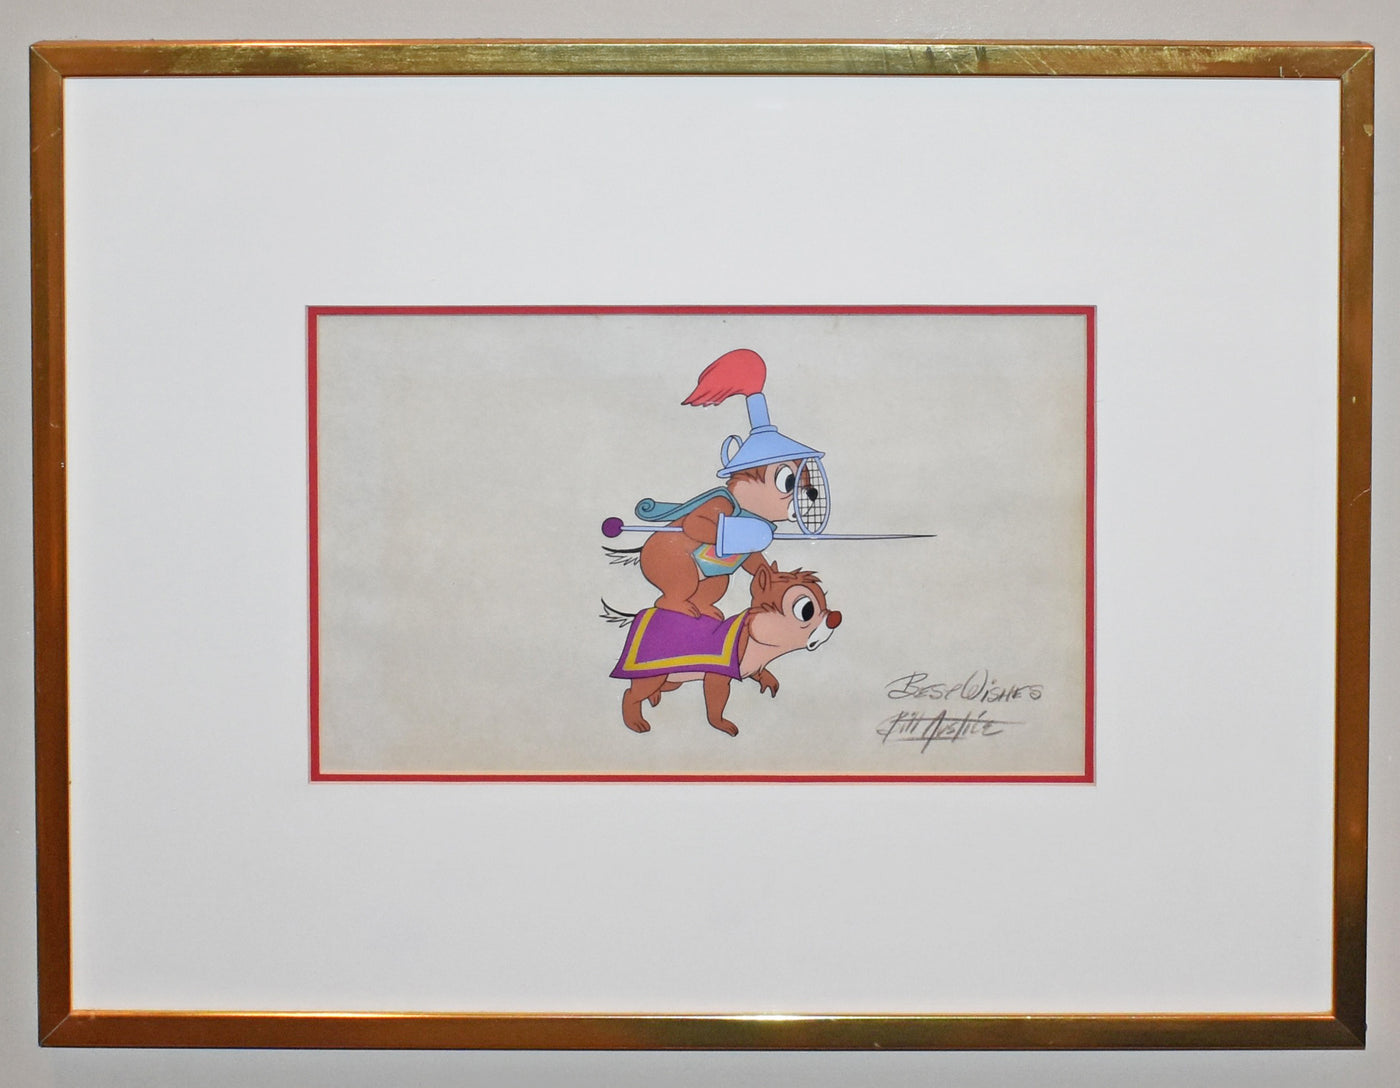 Original Walt Disney Production Cel from Dragon Around signed by Bill Justice